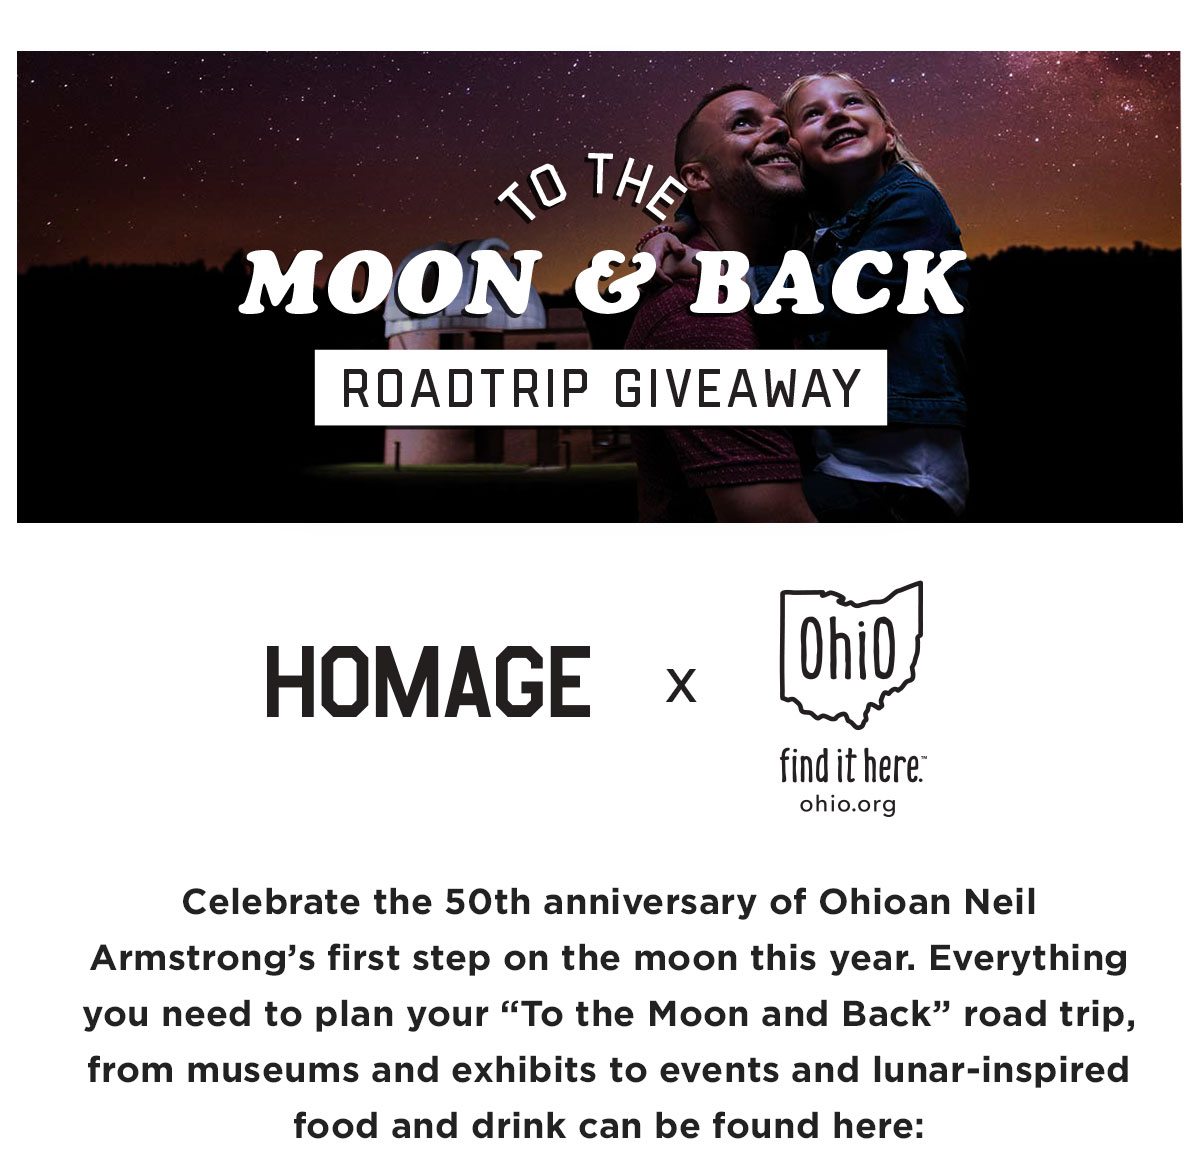 Celebrate the 50th anniversary of Ohioan Neil Armstrong’s first step on the moon this year. Everything you need to plan your “To the Moon and Back” road trip, from museums and exhibits to events and lunar-inspired food and drink can be found here: https://ohio.org/lunar-landing/